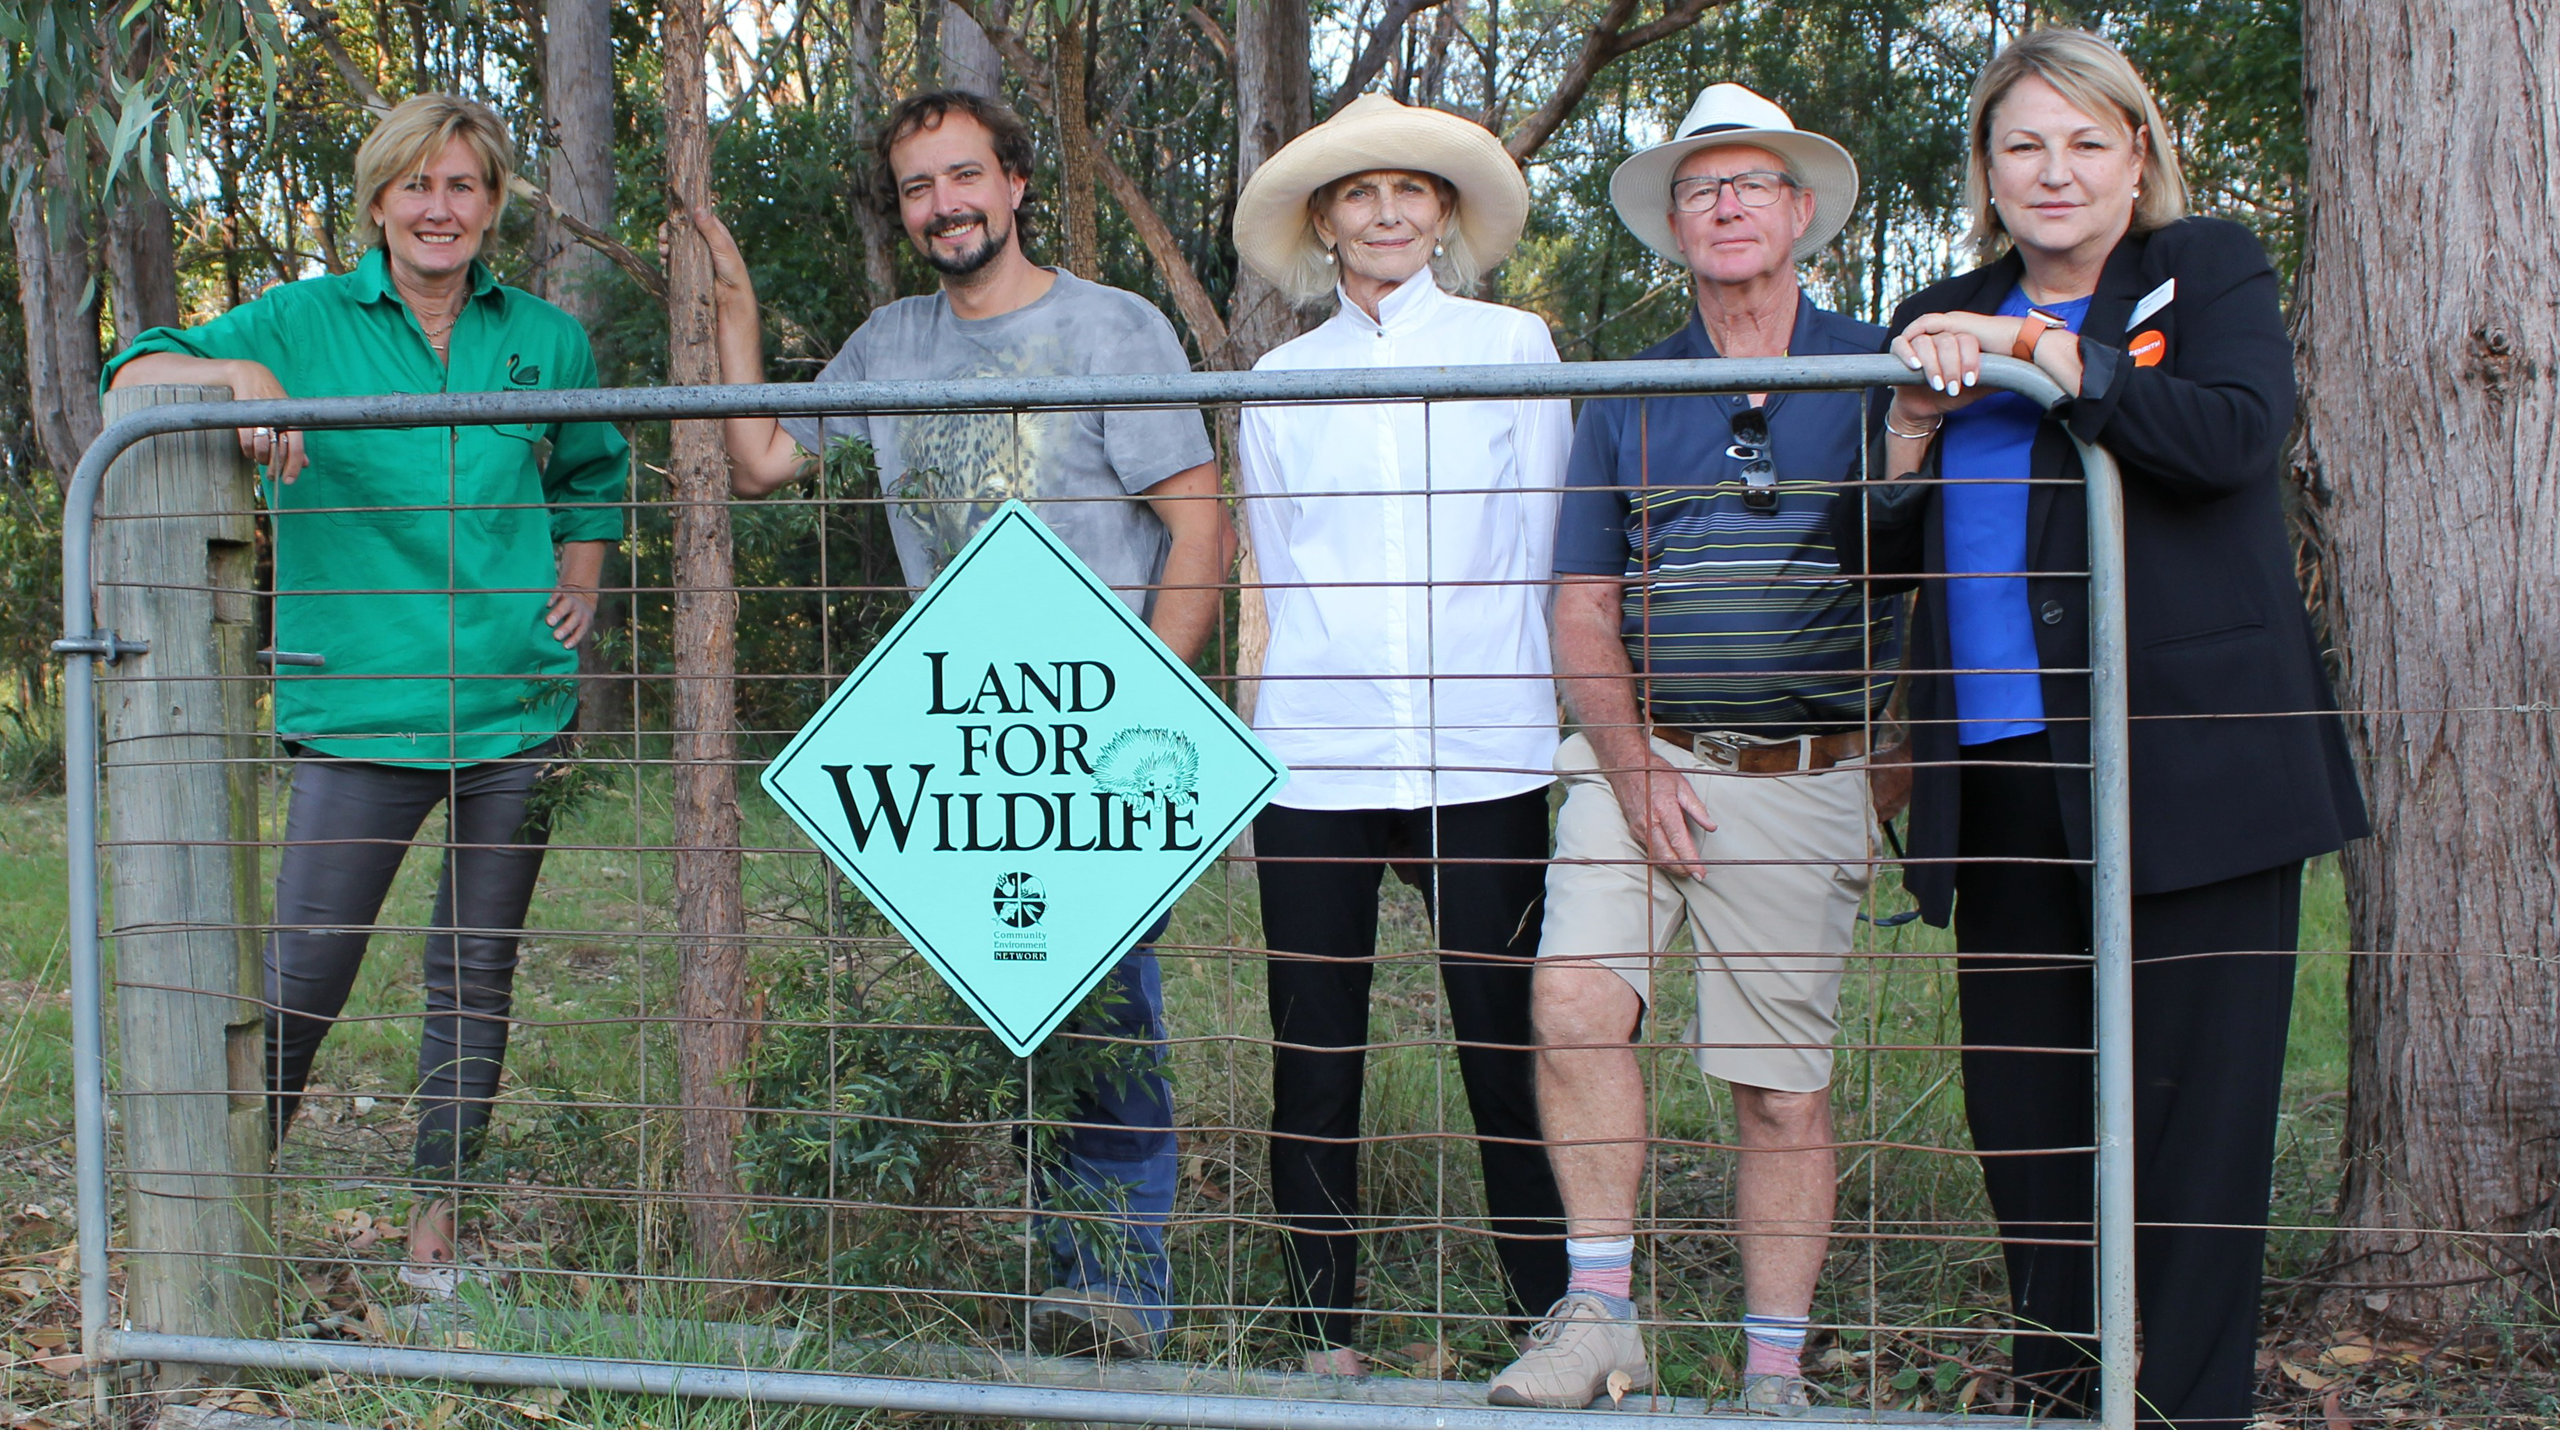 Mulgoa Valley Landcare Group president Lisa Harrold, local landowners Henry Cook, Kerry Spurrett and Scott Bailey, and Penrith Mayor Tricia Hitchen at the Land for Wildlife launch.